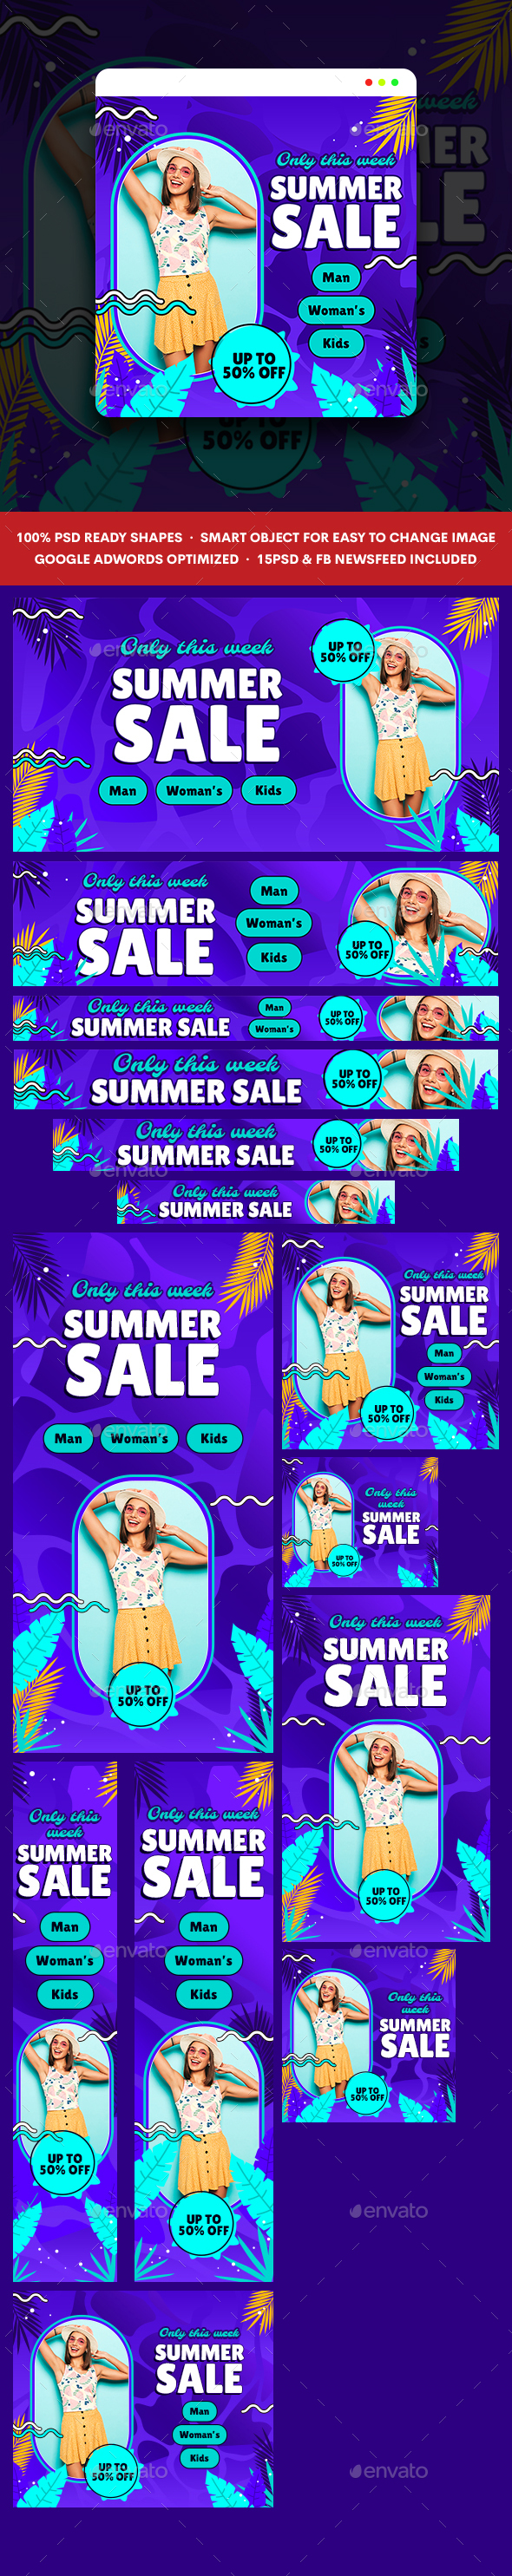 [DOWNLOAD]Summer Sale Banners Ad